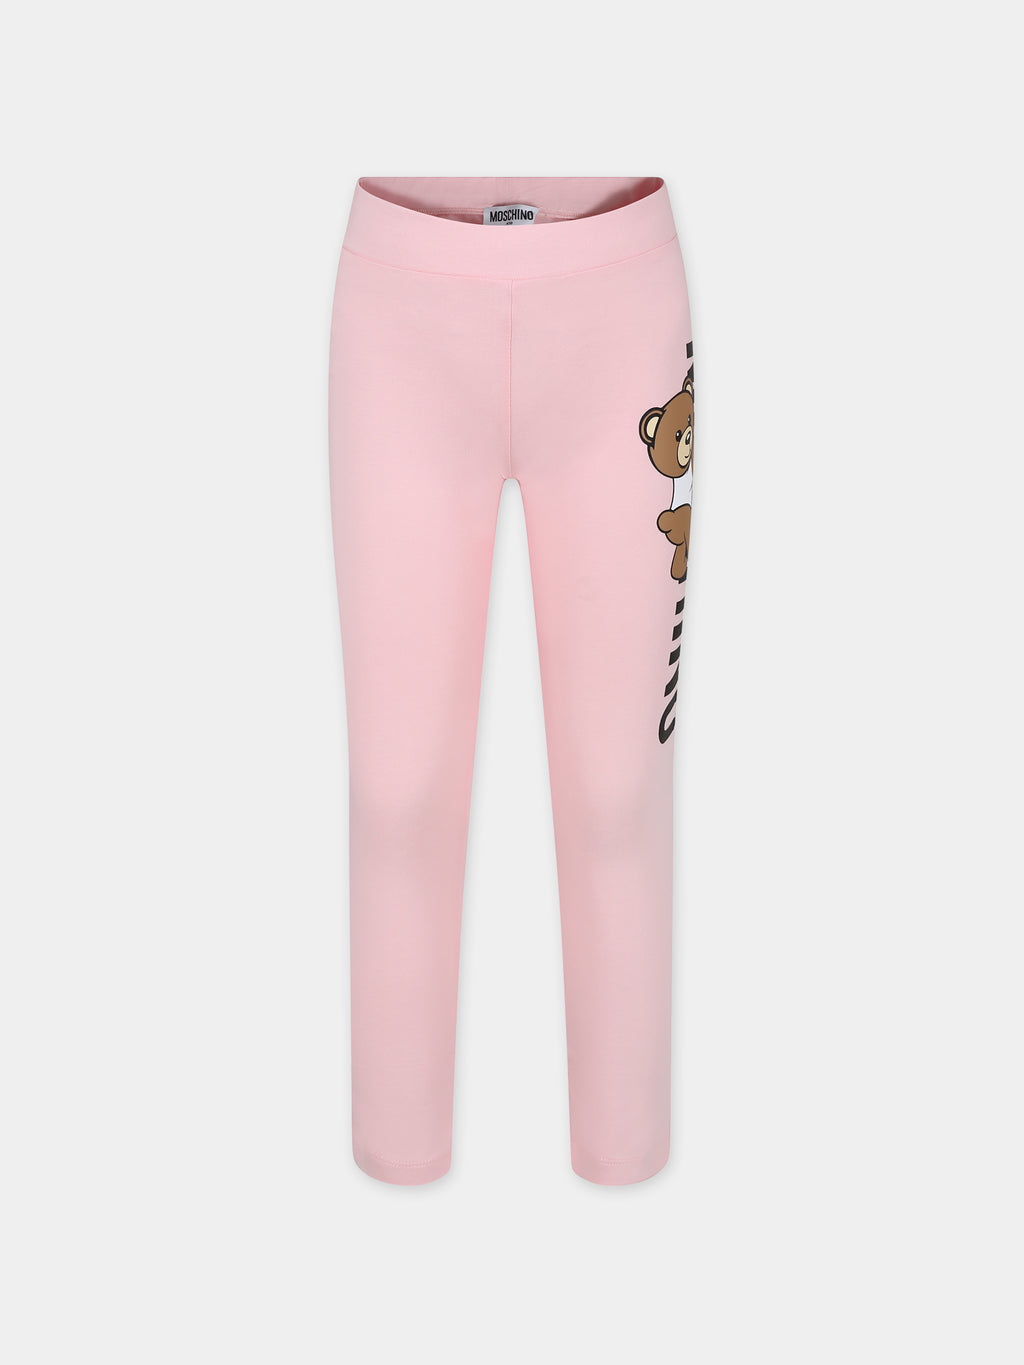 Pink leggings for girl with Teddy bear and logo